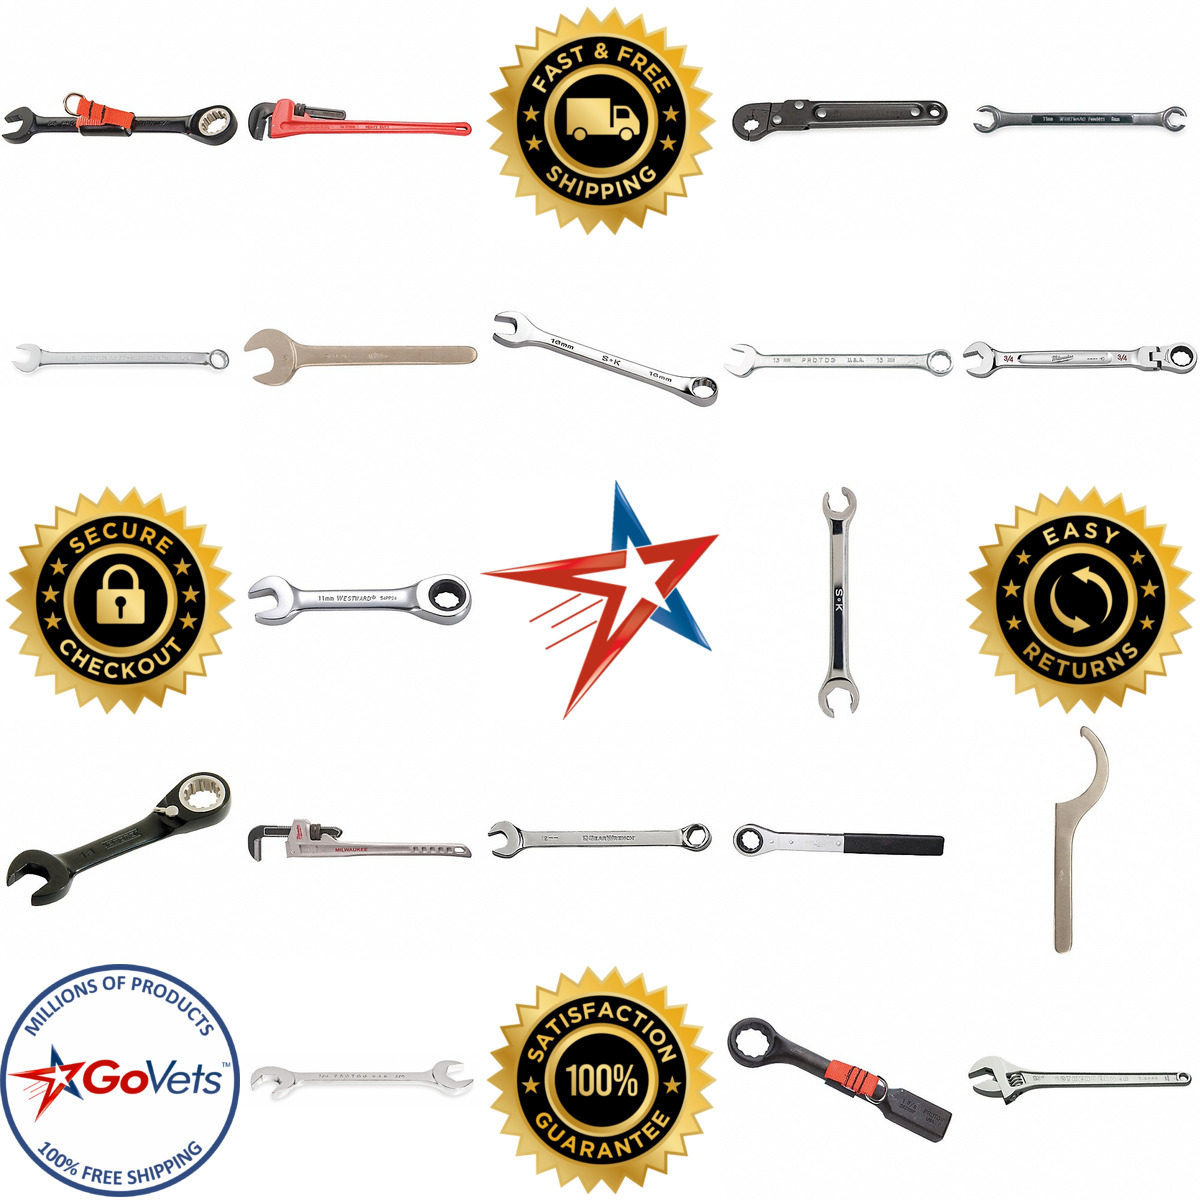 A selection of Wrenches products on GoVets